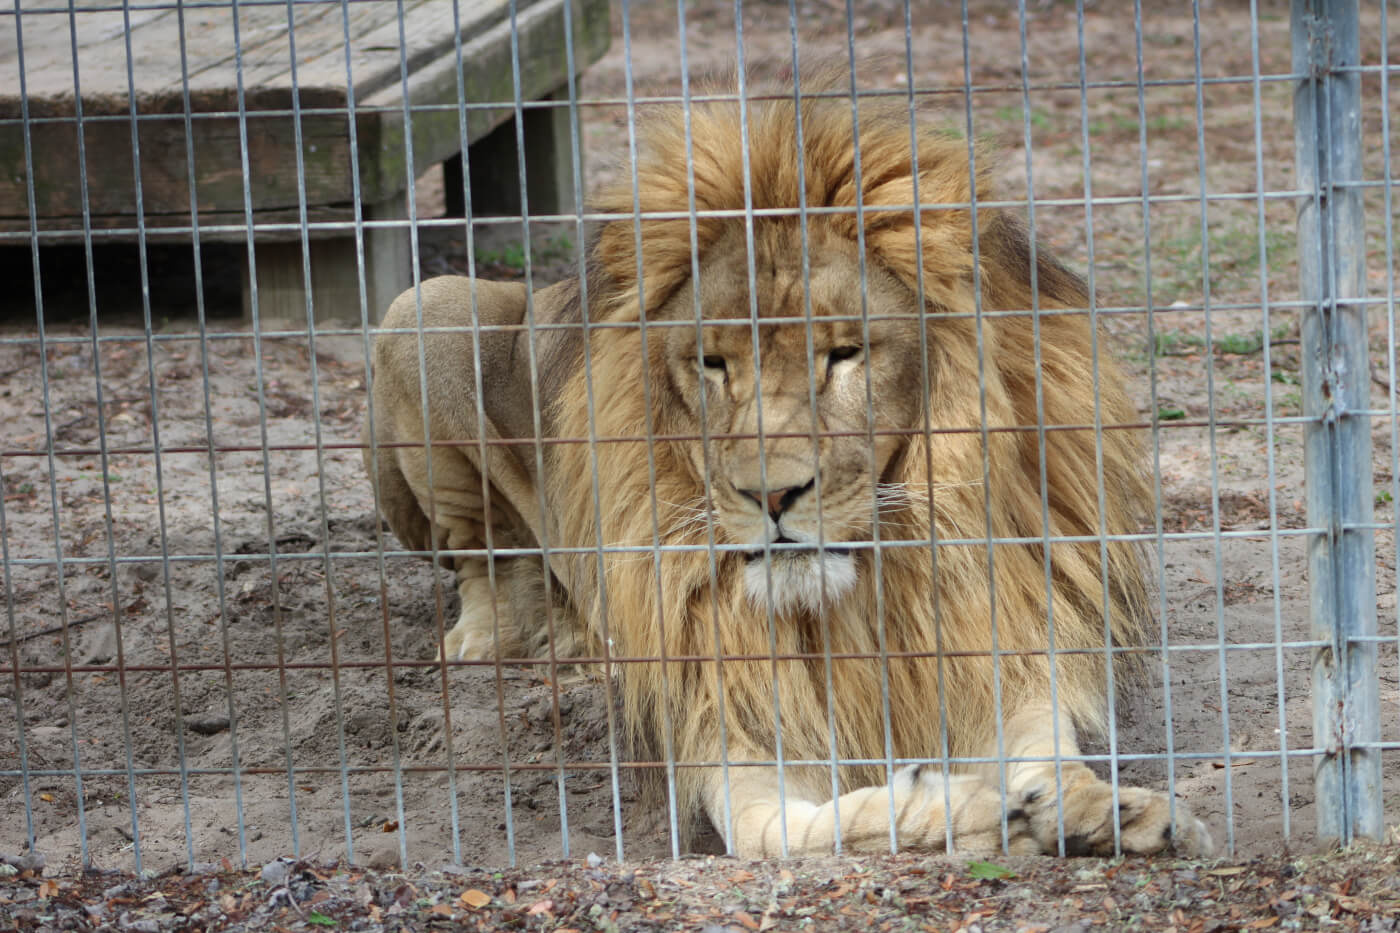 An Image of Brave Lion sitting and staring from the cage.